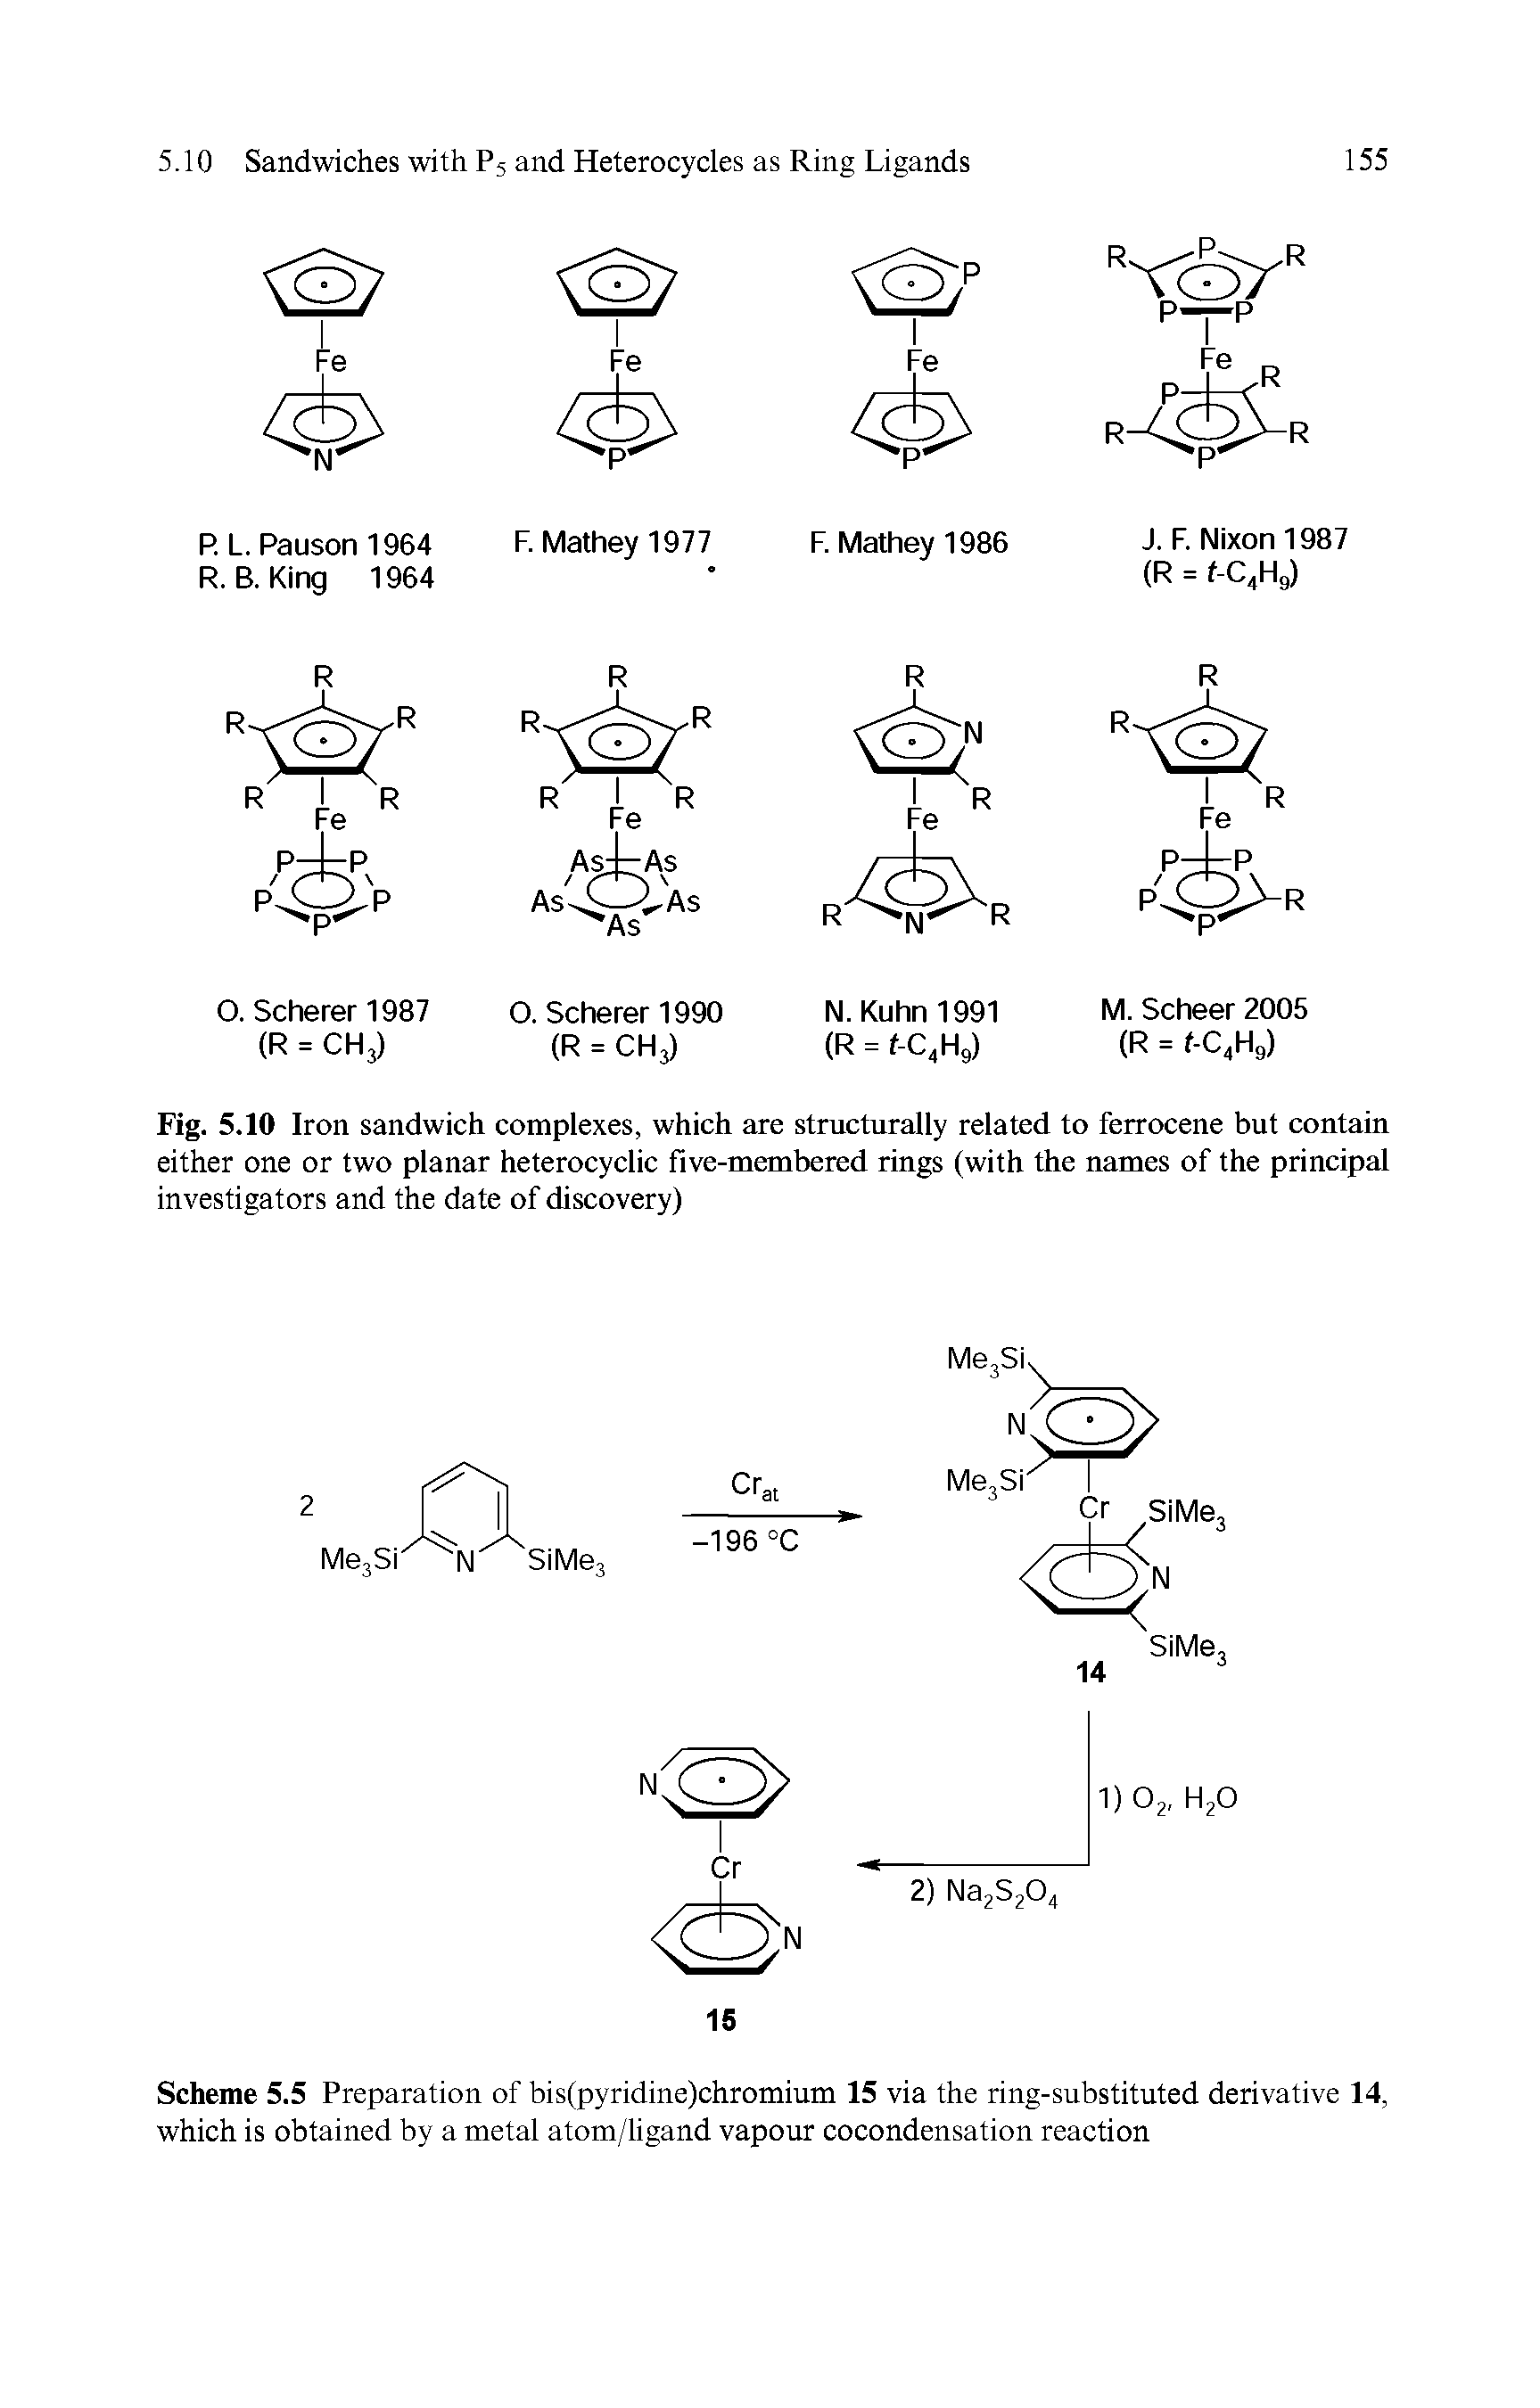 Fig. 5.10 Iron sandwich complexes, which are structurally related to ferrocene but contain either one or two planar heterocyclic five-membered rings (with the names of the principal investigators and the date of discovery)...